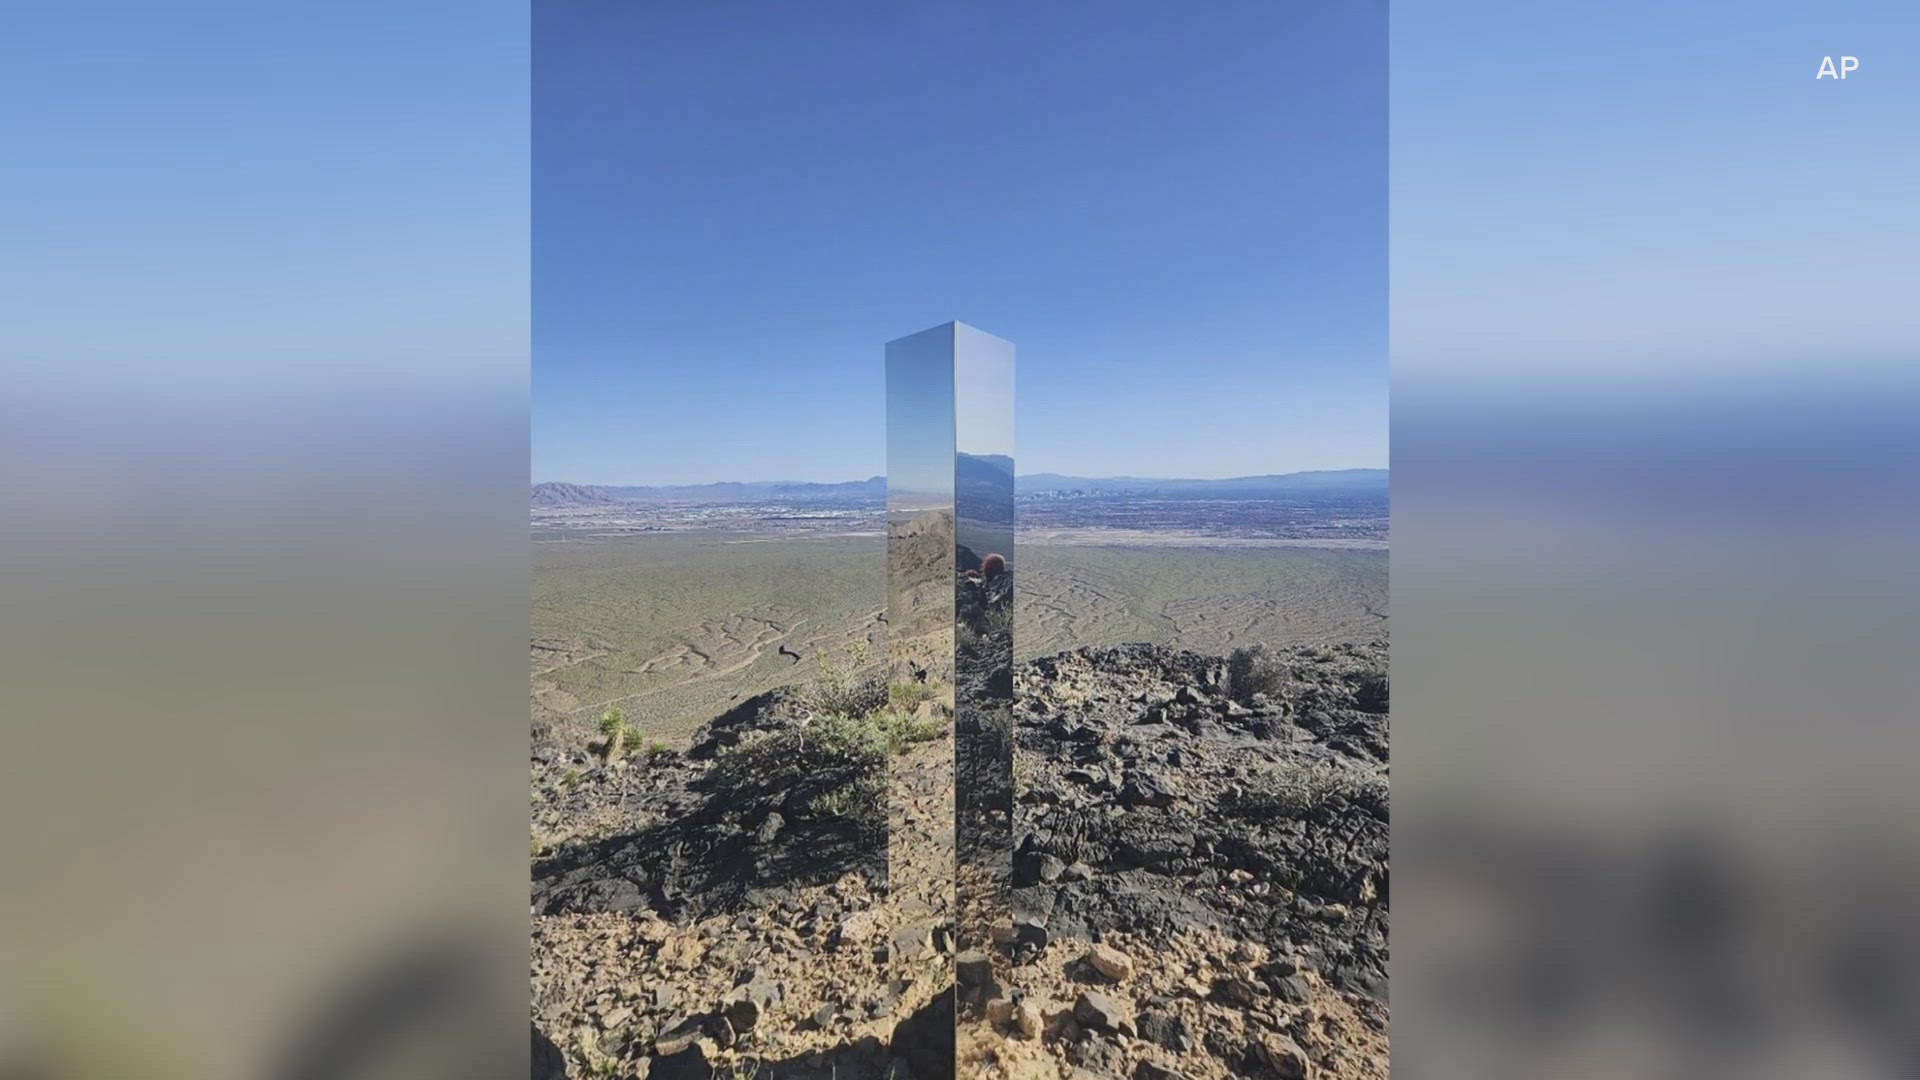 Las Vegas police shared photos of a new monolith found on top of a mountain high in the desert, but nobody quite knows how or why it got there.